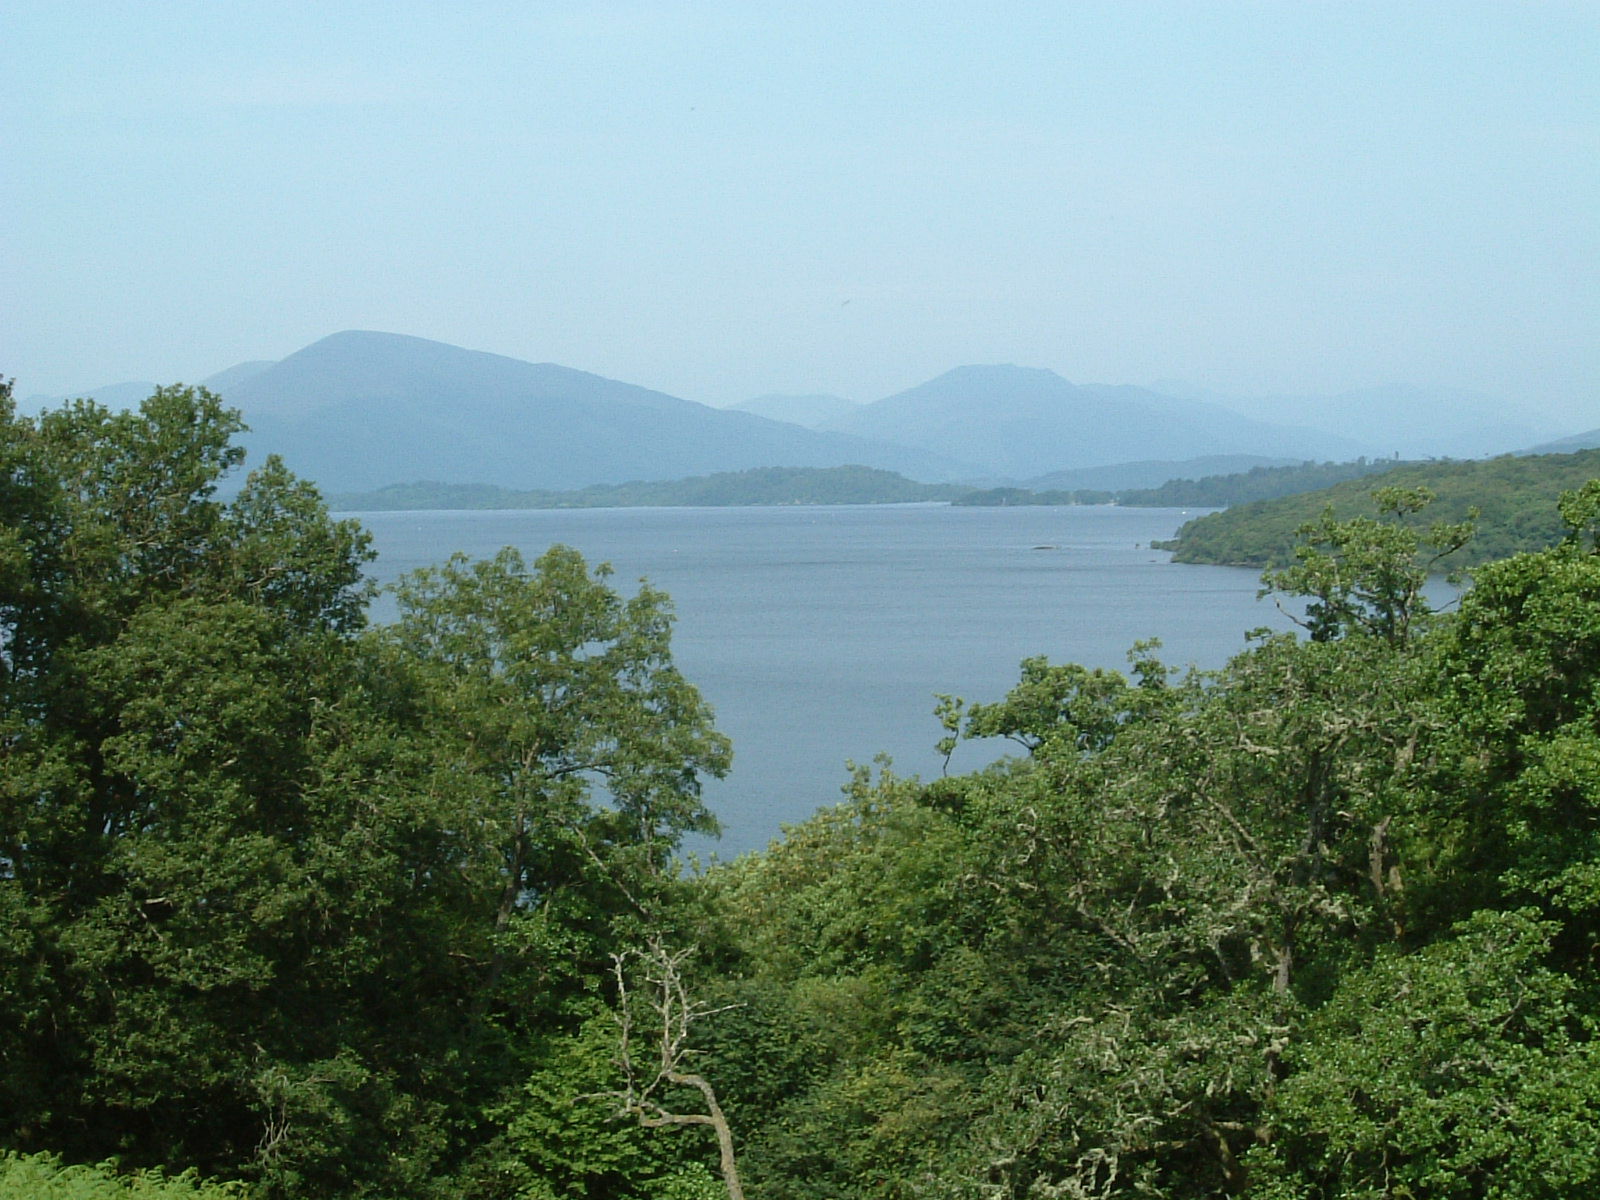 A tantalising glimpse of Loch Lomond from the West Highland Way